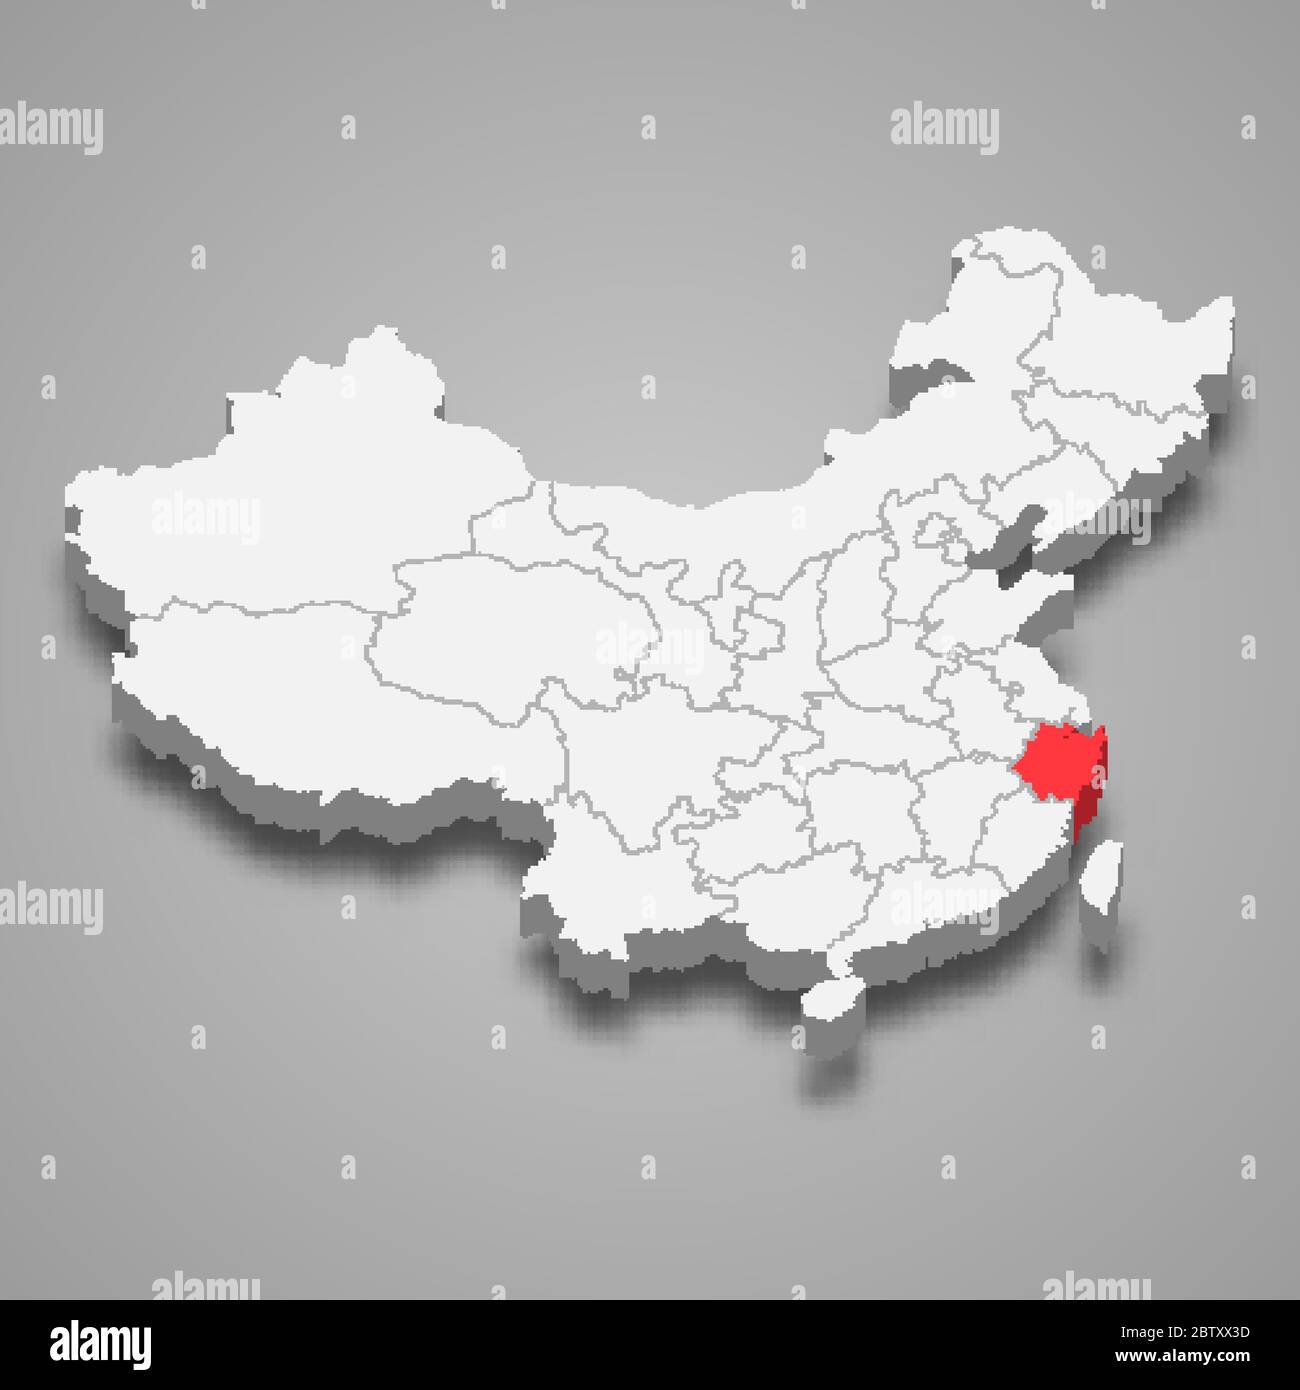 Zhejiang province location within China 3d map Stock Vector